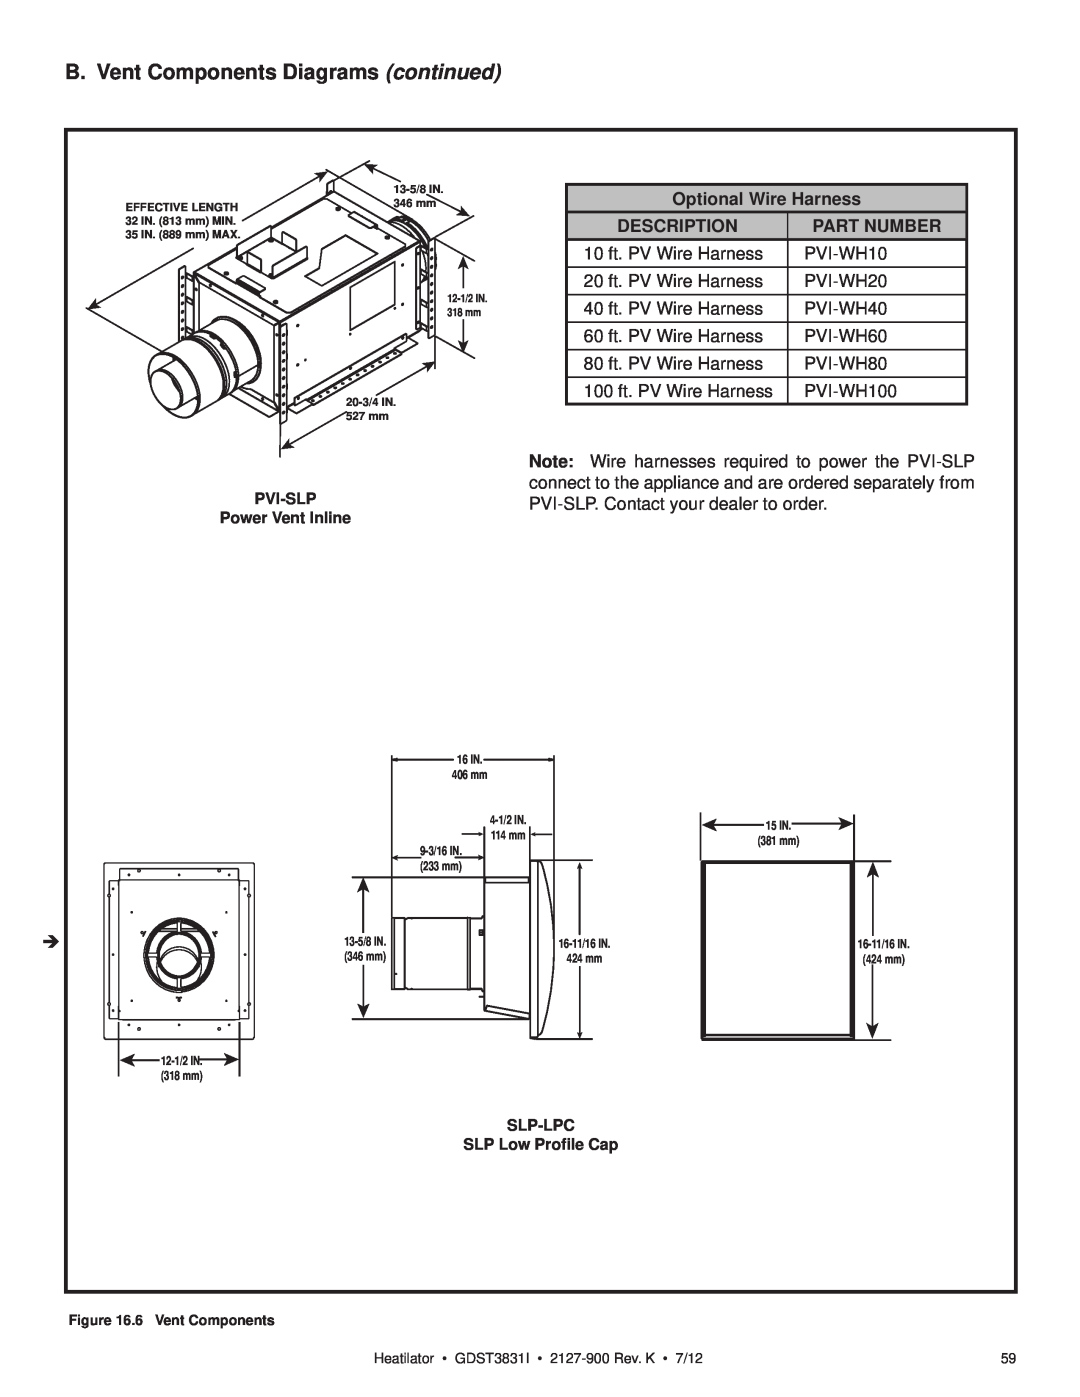 Heatiator GDST3831I owner manual B. Vent Components Diagrams continued, Optional Wire Harness, Description, Part Number 